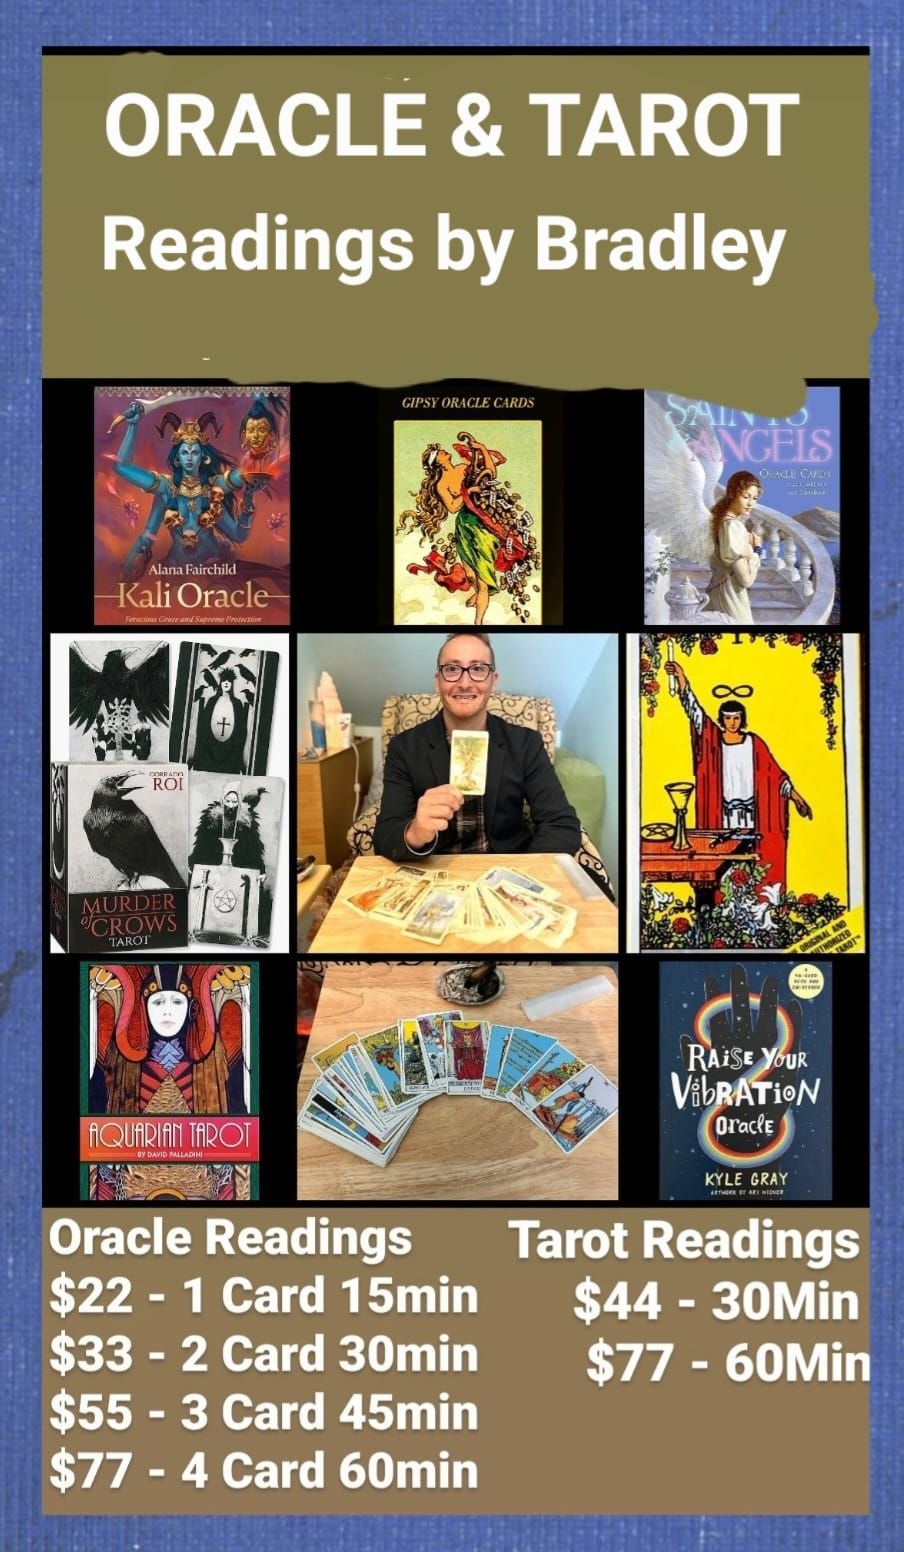 ORACLE & TAROT READINGS - SUNDAYS By appointment with Bradley